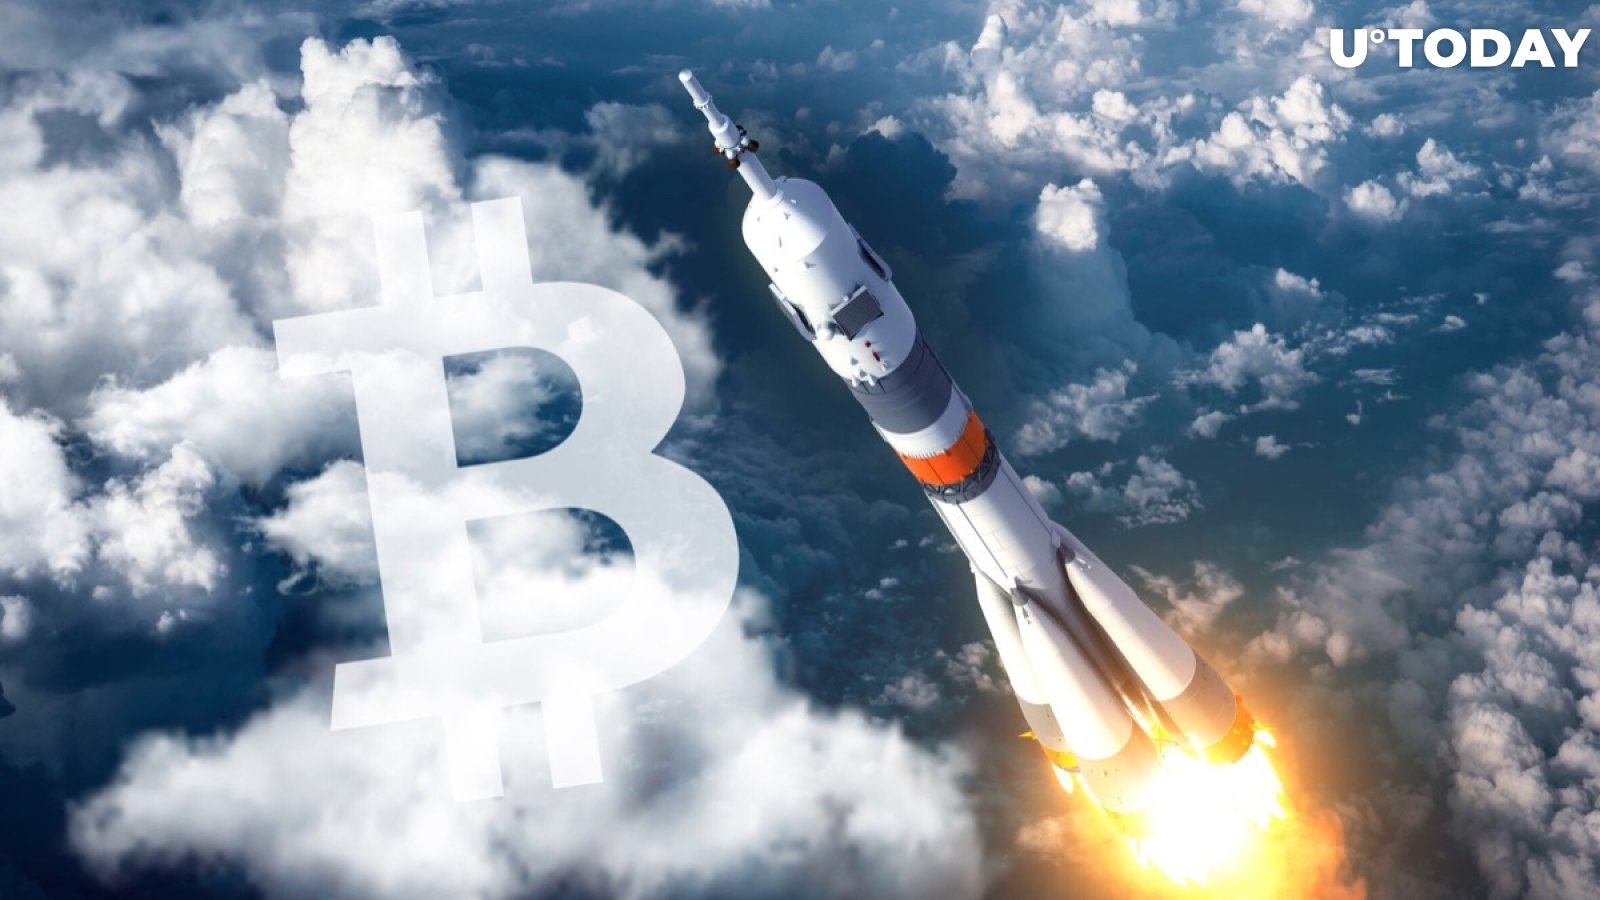 Bitcoin Price Vying to Hit $6,000 After Reaching Another Yearly High